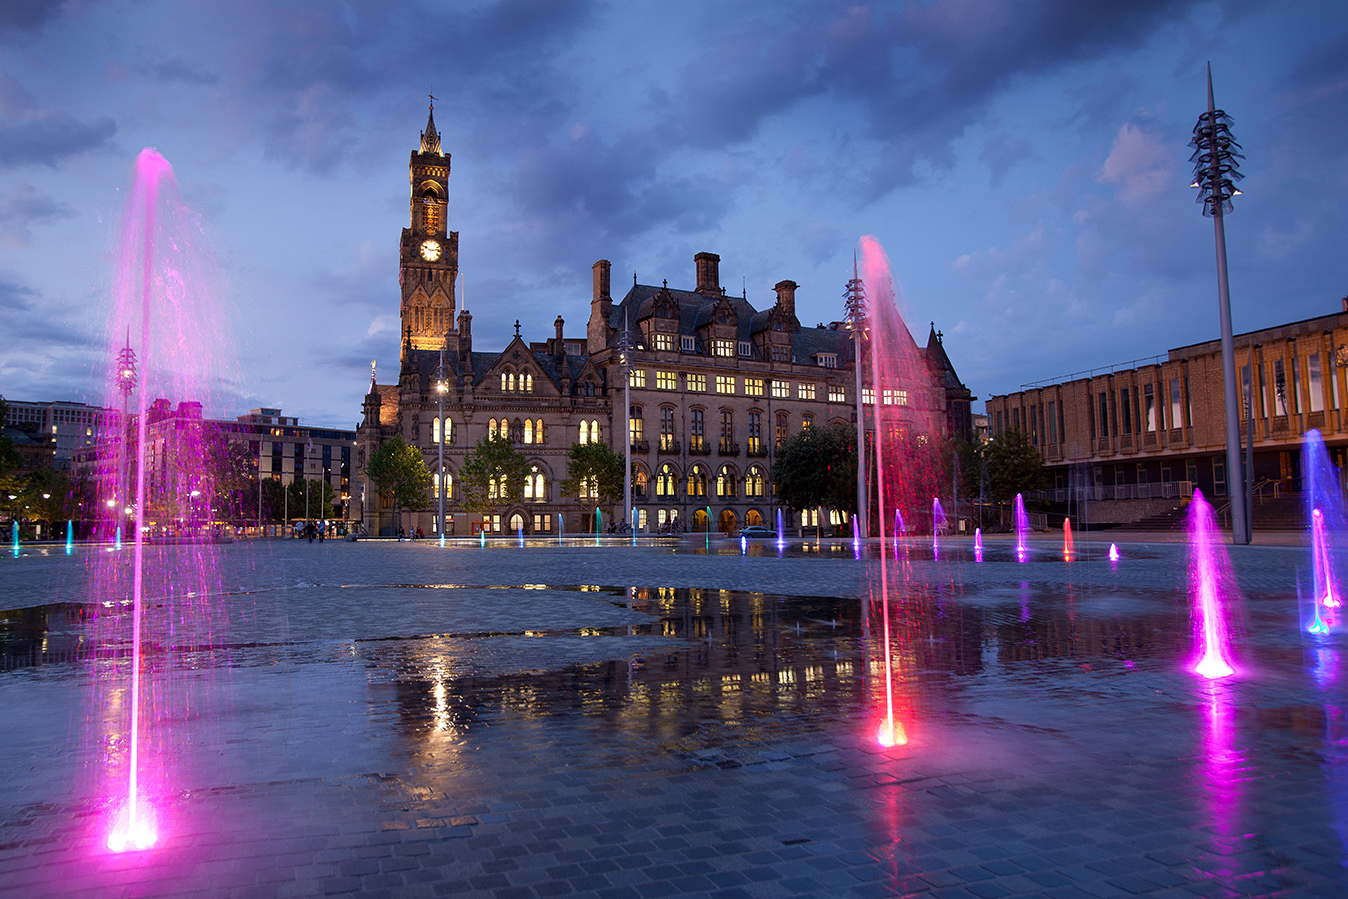 Centenary Square in Bradford at dusk lit up with columns of pink and red light